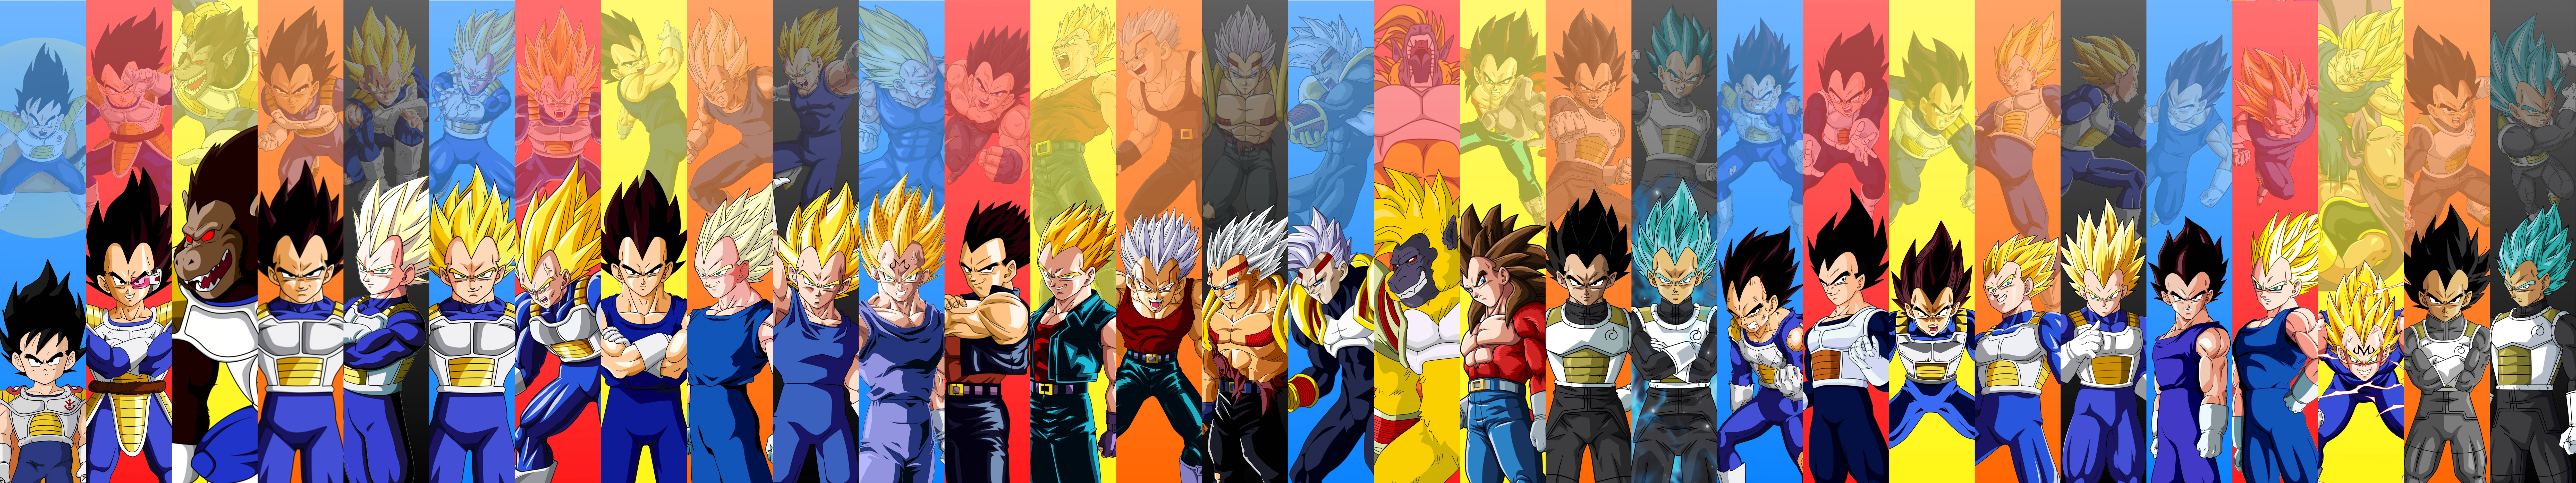 Finished a 4K image that features 45 DBZ Villians and Forms [Raditz to Kid Buu] [17277x2160]. See Comments for More!